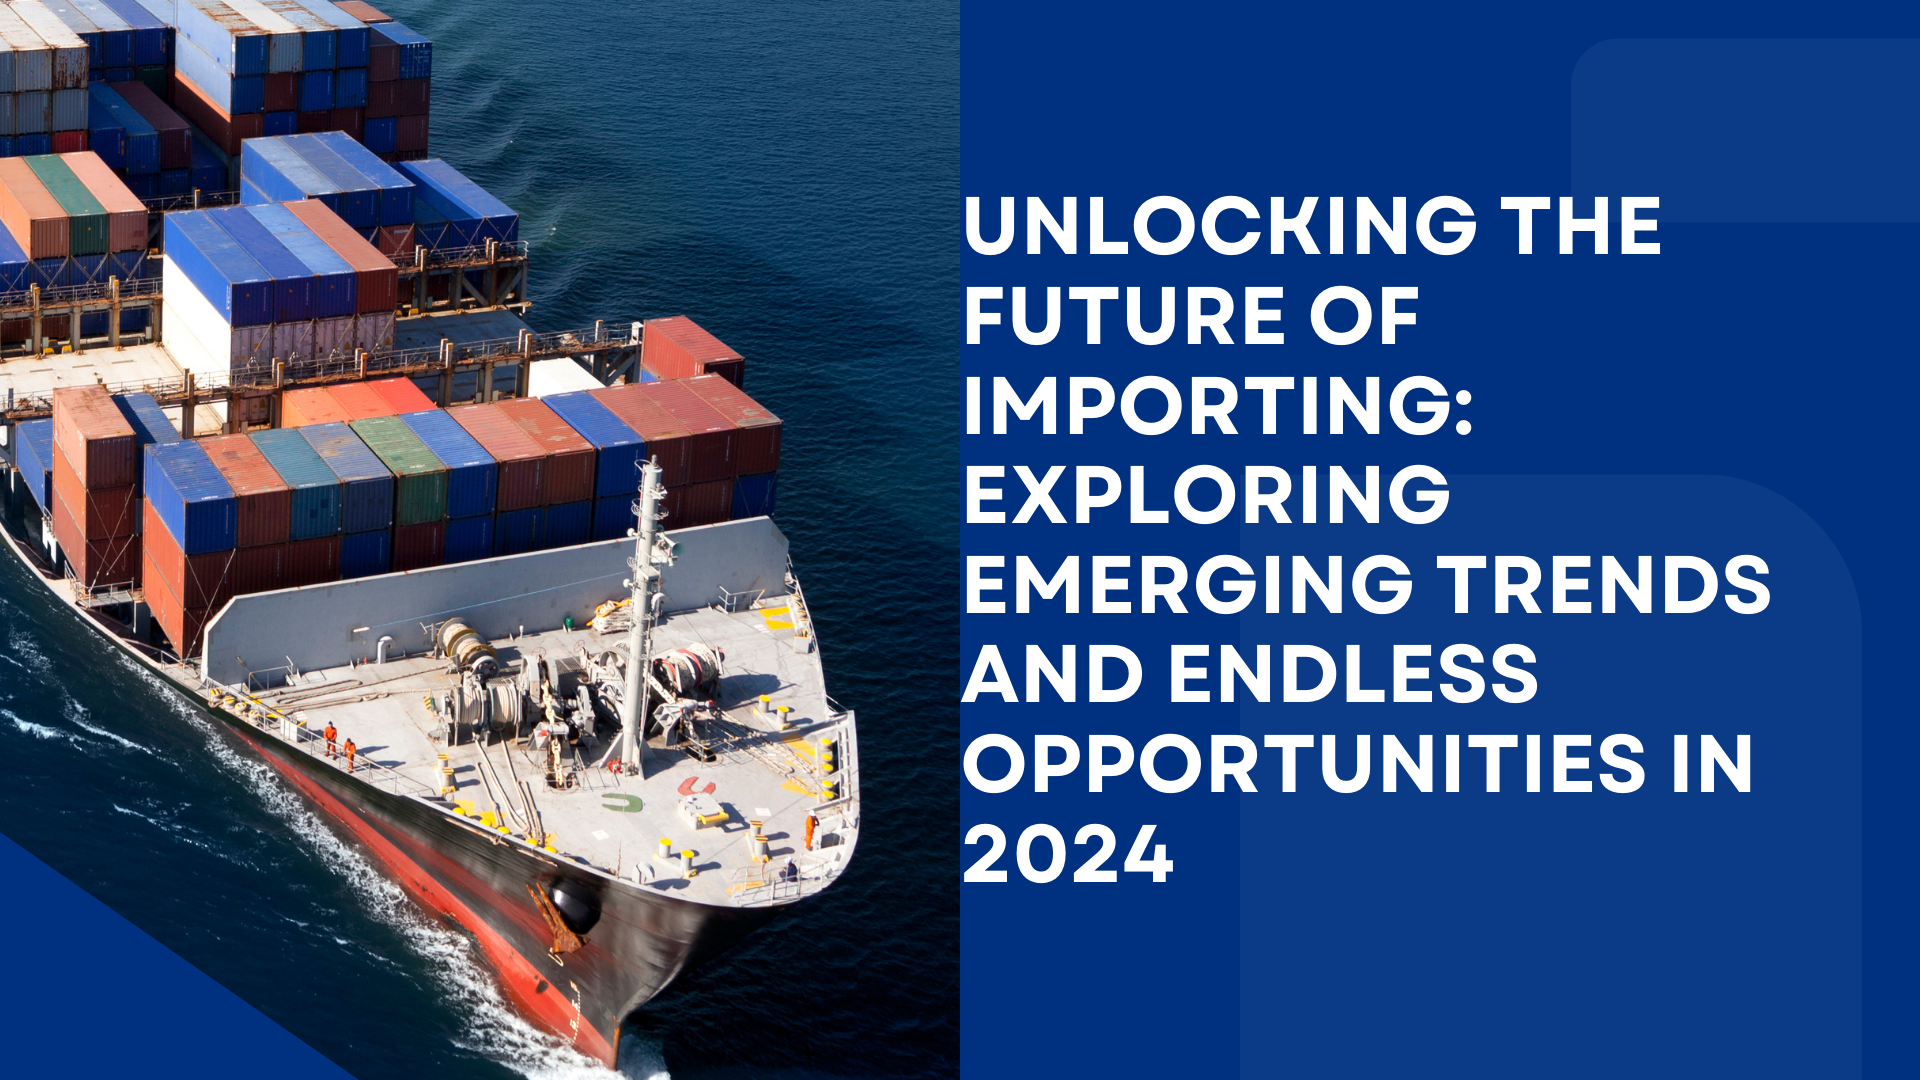 Unlocking the Future of Importing: Exploring Emerging Trends and Endless Opportunities in 2024